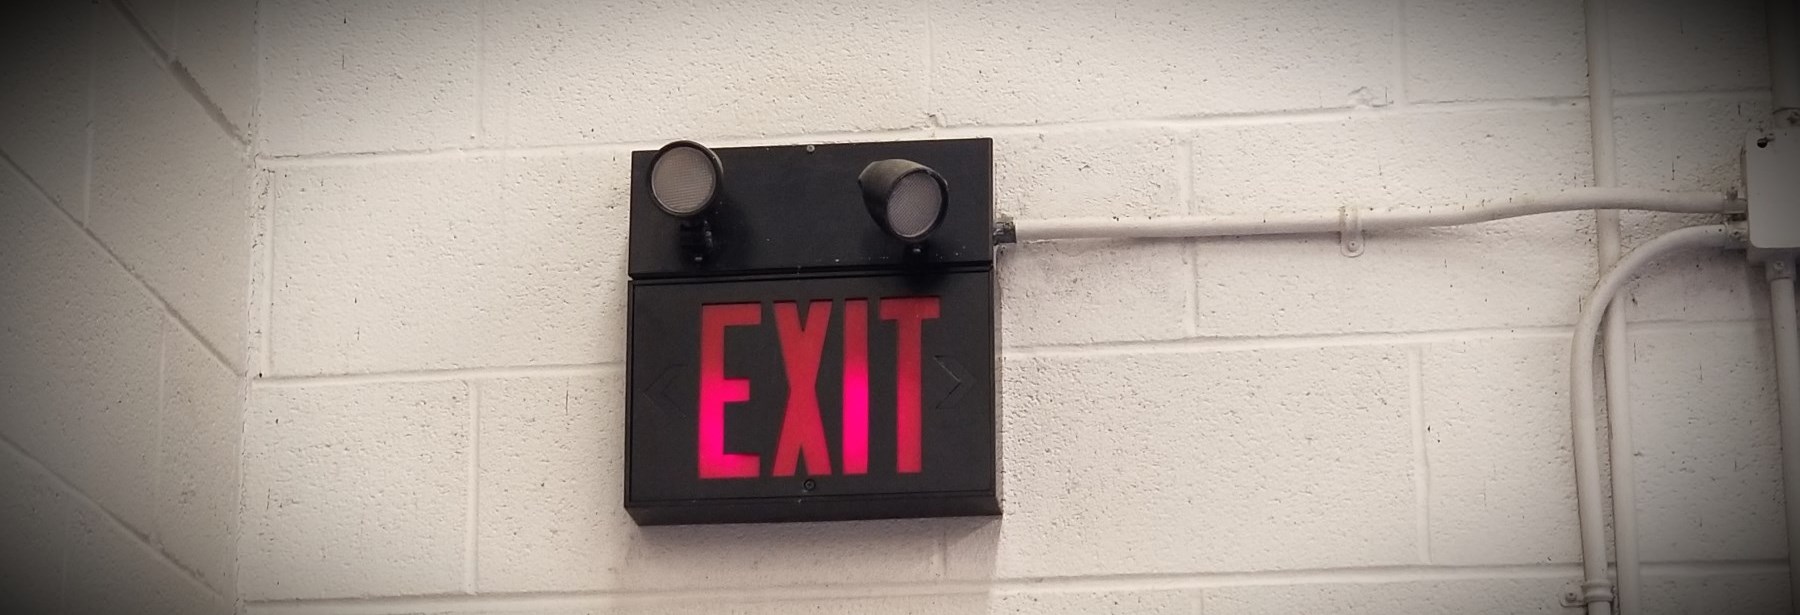 Exit sign inside a building on a wall